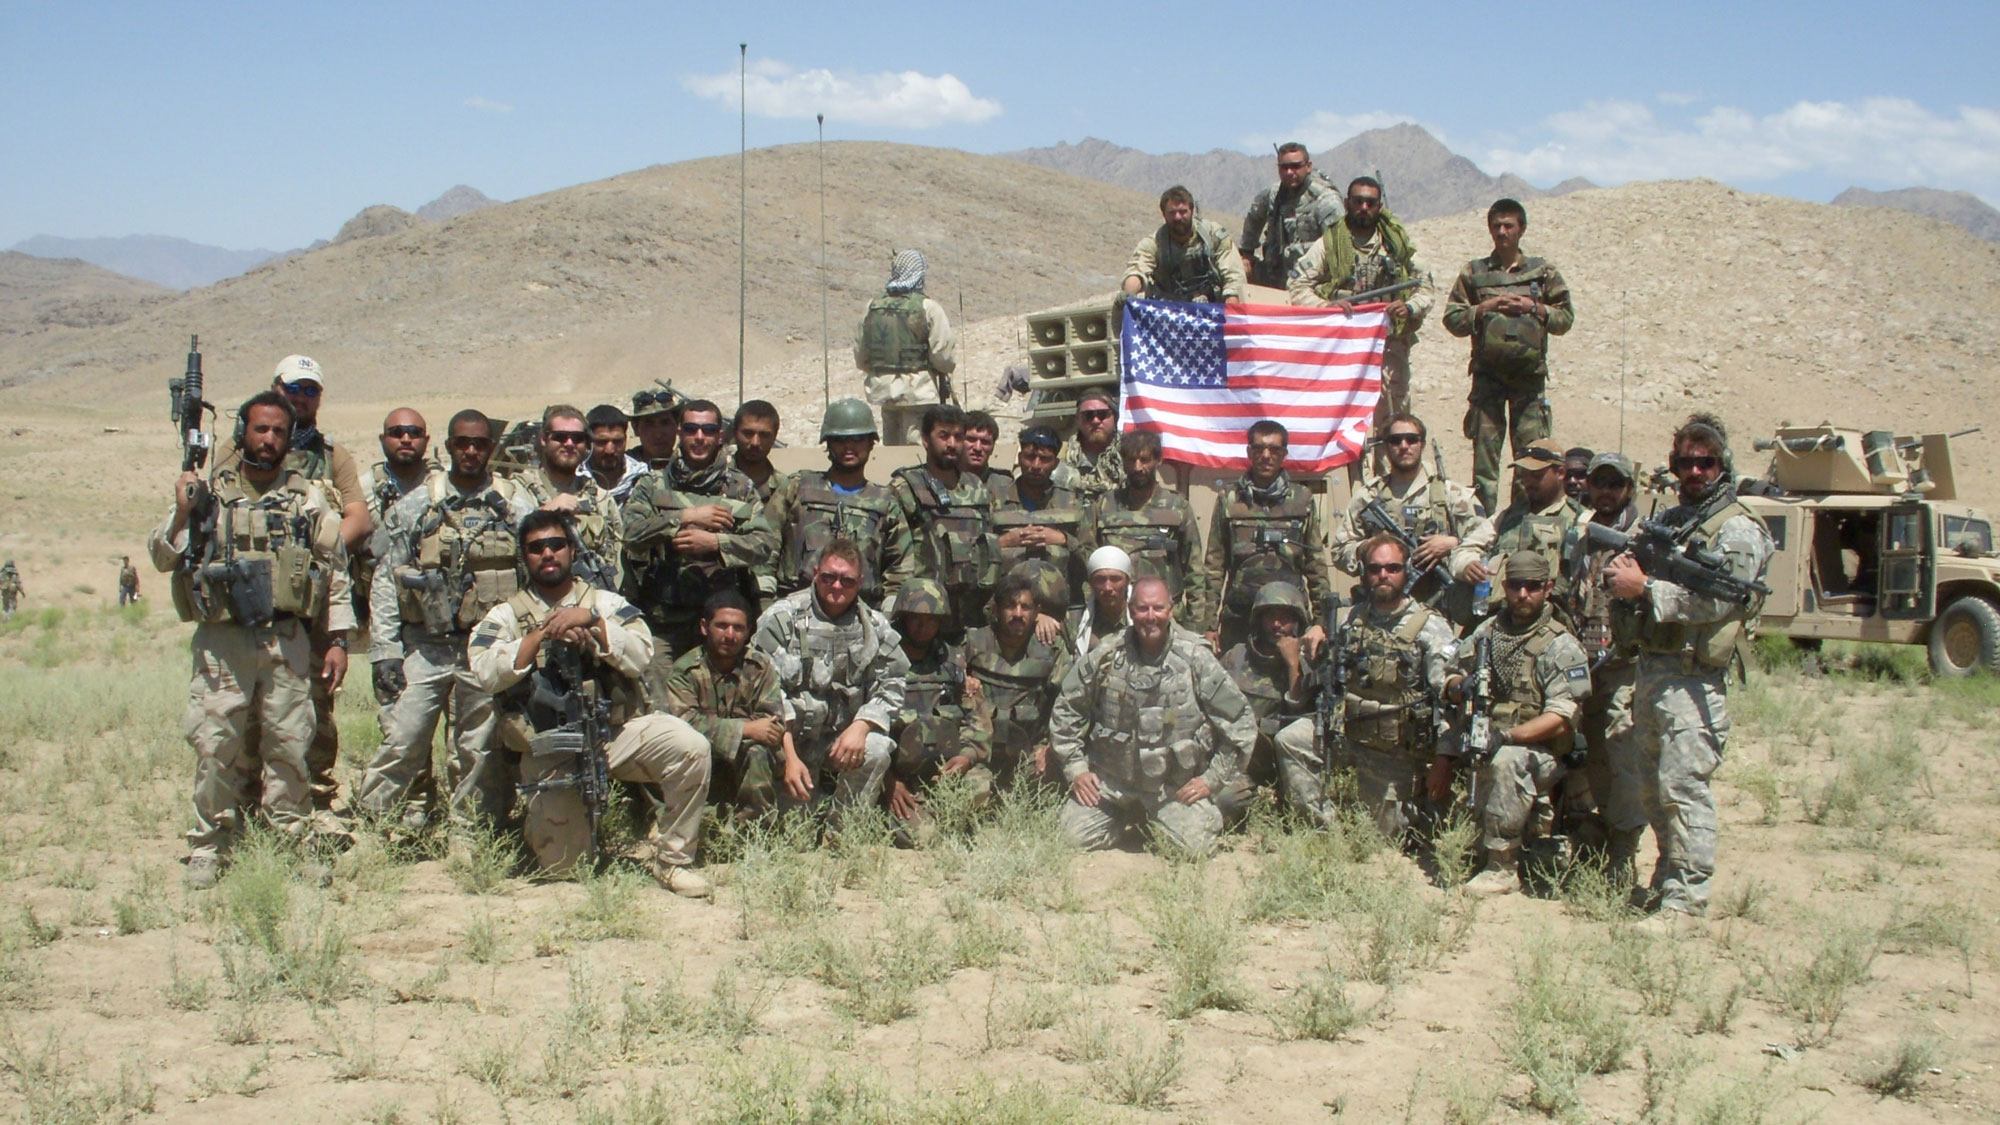 Wenger on combat patrol with Special Forces Operational Group Alpha 723 and Afghan Army Infantry platoon in Zabol Province, Afghanistan, May 2007.